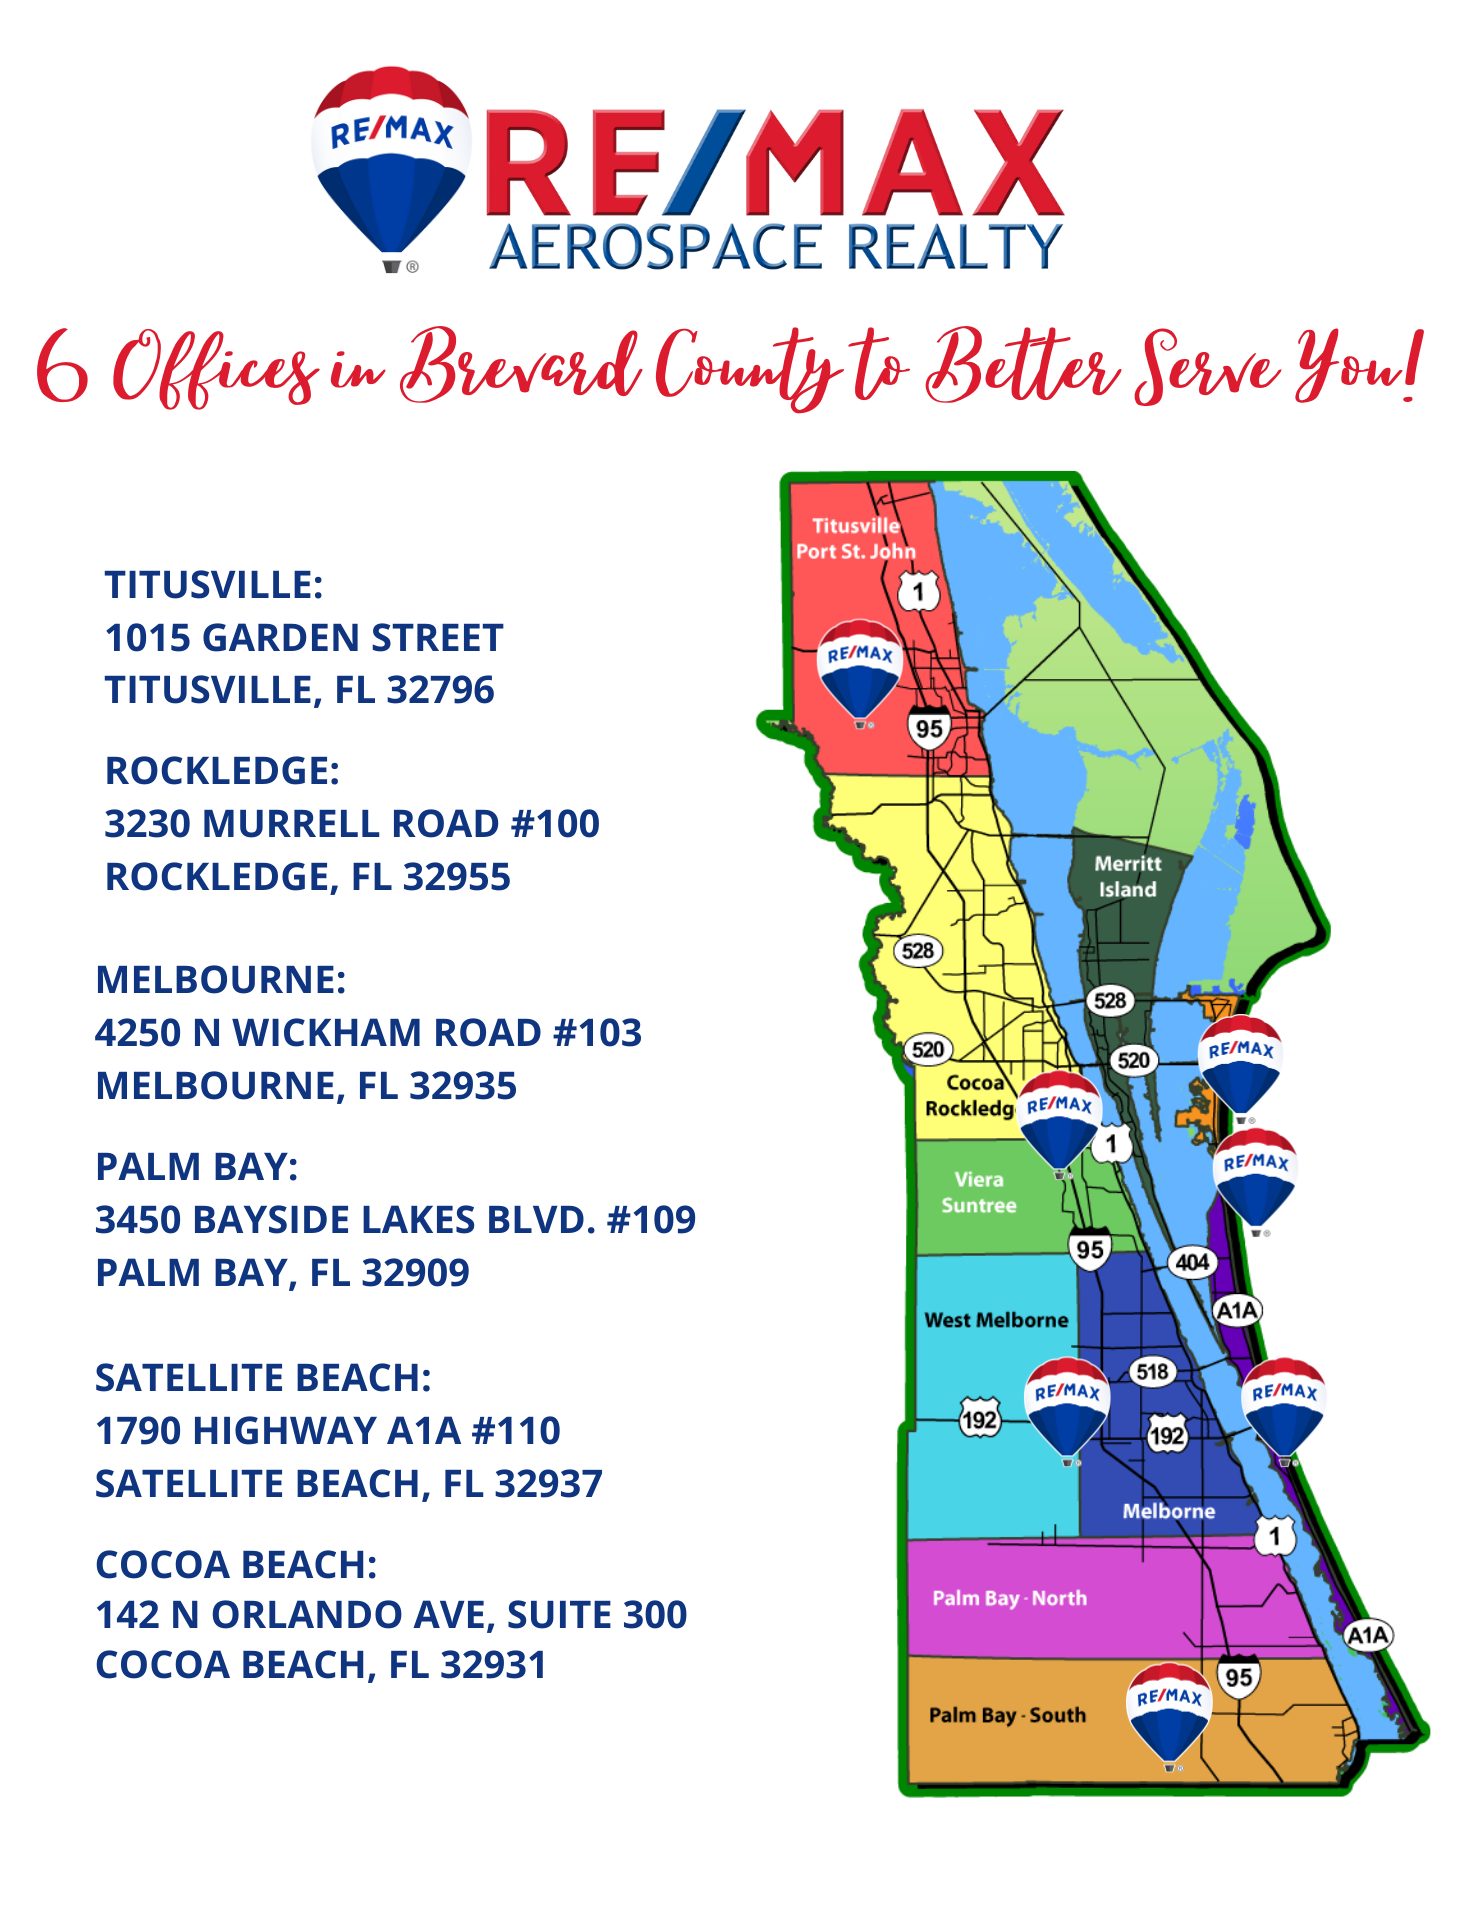 RE/MAX Aerospace Realty - 7 Locations to Better Serve Brevard County - Rockledge: 3230 Murrel Road #100, Rockledge, FL 32955 - Melbourne: 4250 N. Wickham Road #103, Melbourne, FL 32935 - Palm Bay: 3450 Bayside Lakes Blvd #109, Palm Bay, FL 32909 - Satellite Beach: 1790 Highway A1A #110, Satellite Beach, FL 32937 - Cocoa: 3815 N. US Highway 1 #108, Cocoa, FL 32936 - Cape Canaveral: 6910 N. Atlantic Ave., Cape Canaveral, FL 32920 - Titusville: 4987 S. Washington Ave., Titusville, FL 32796 - 321-631-5511 - www.aerospacerealty.com